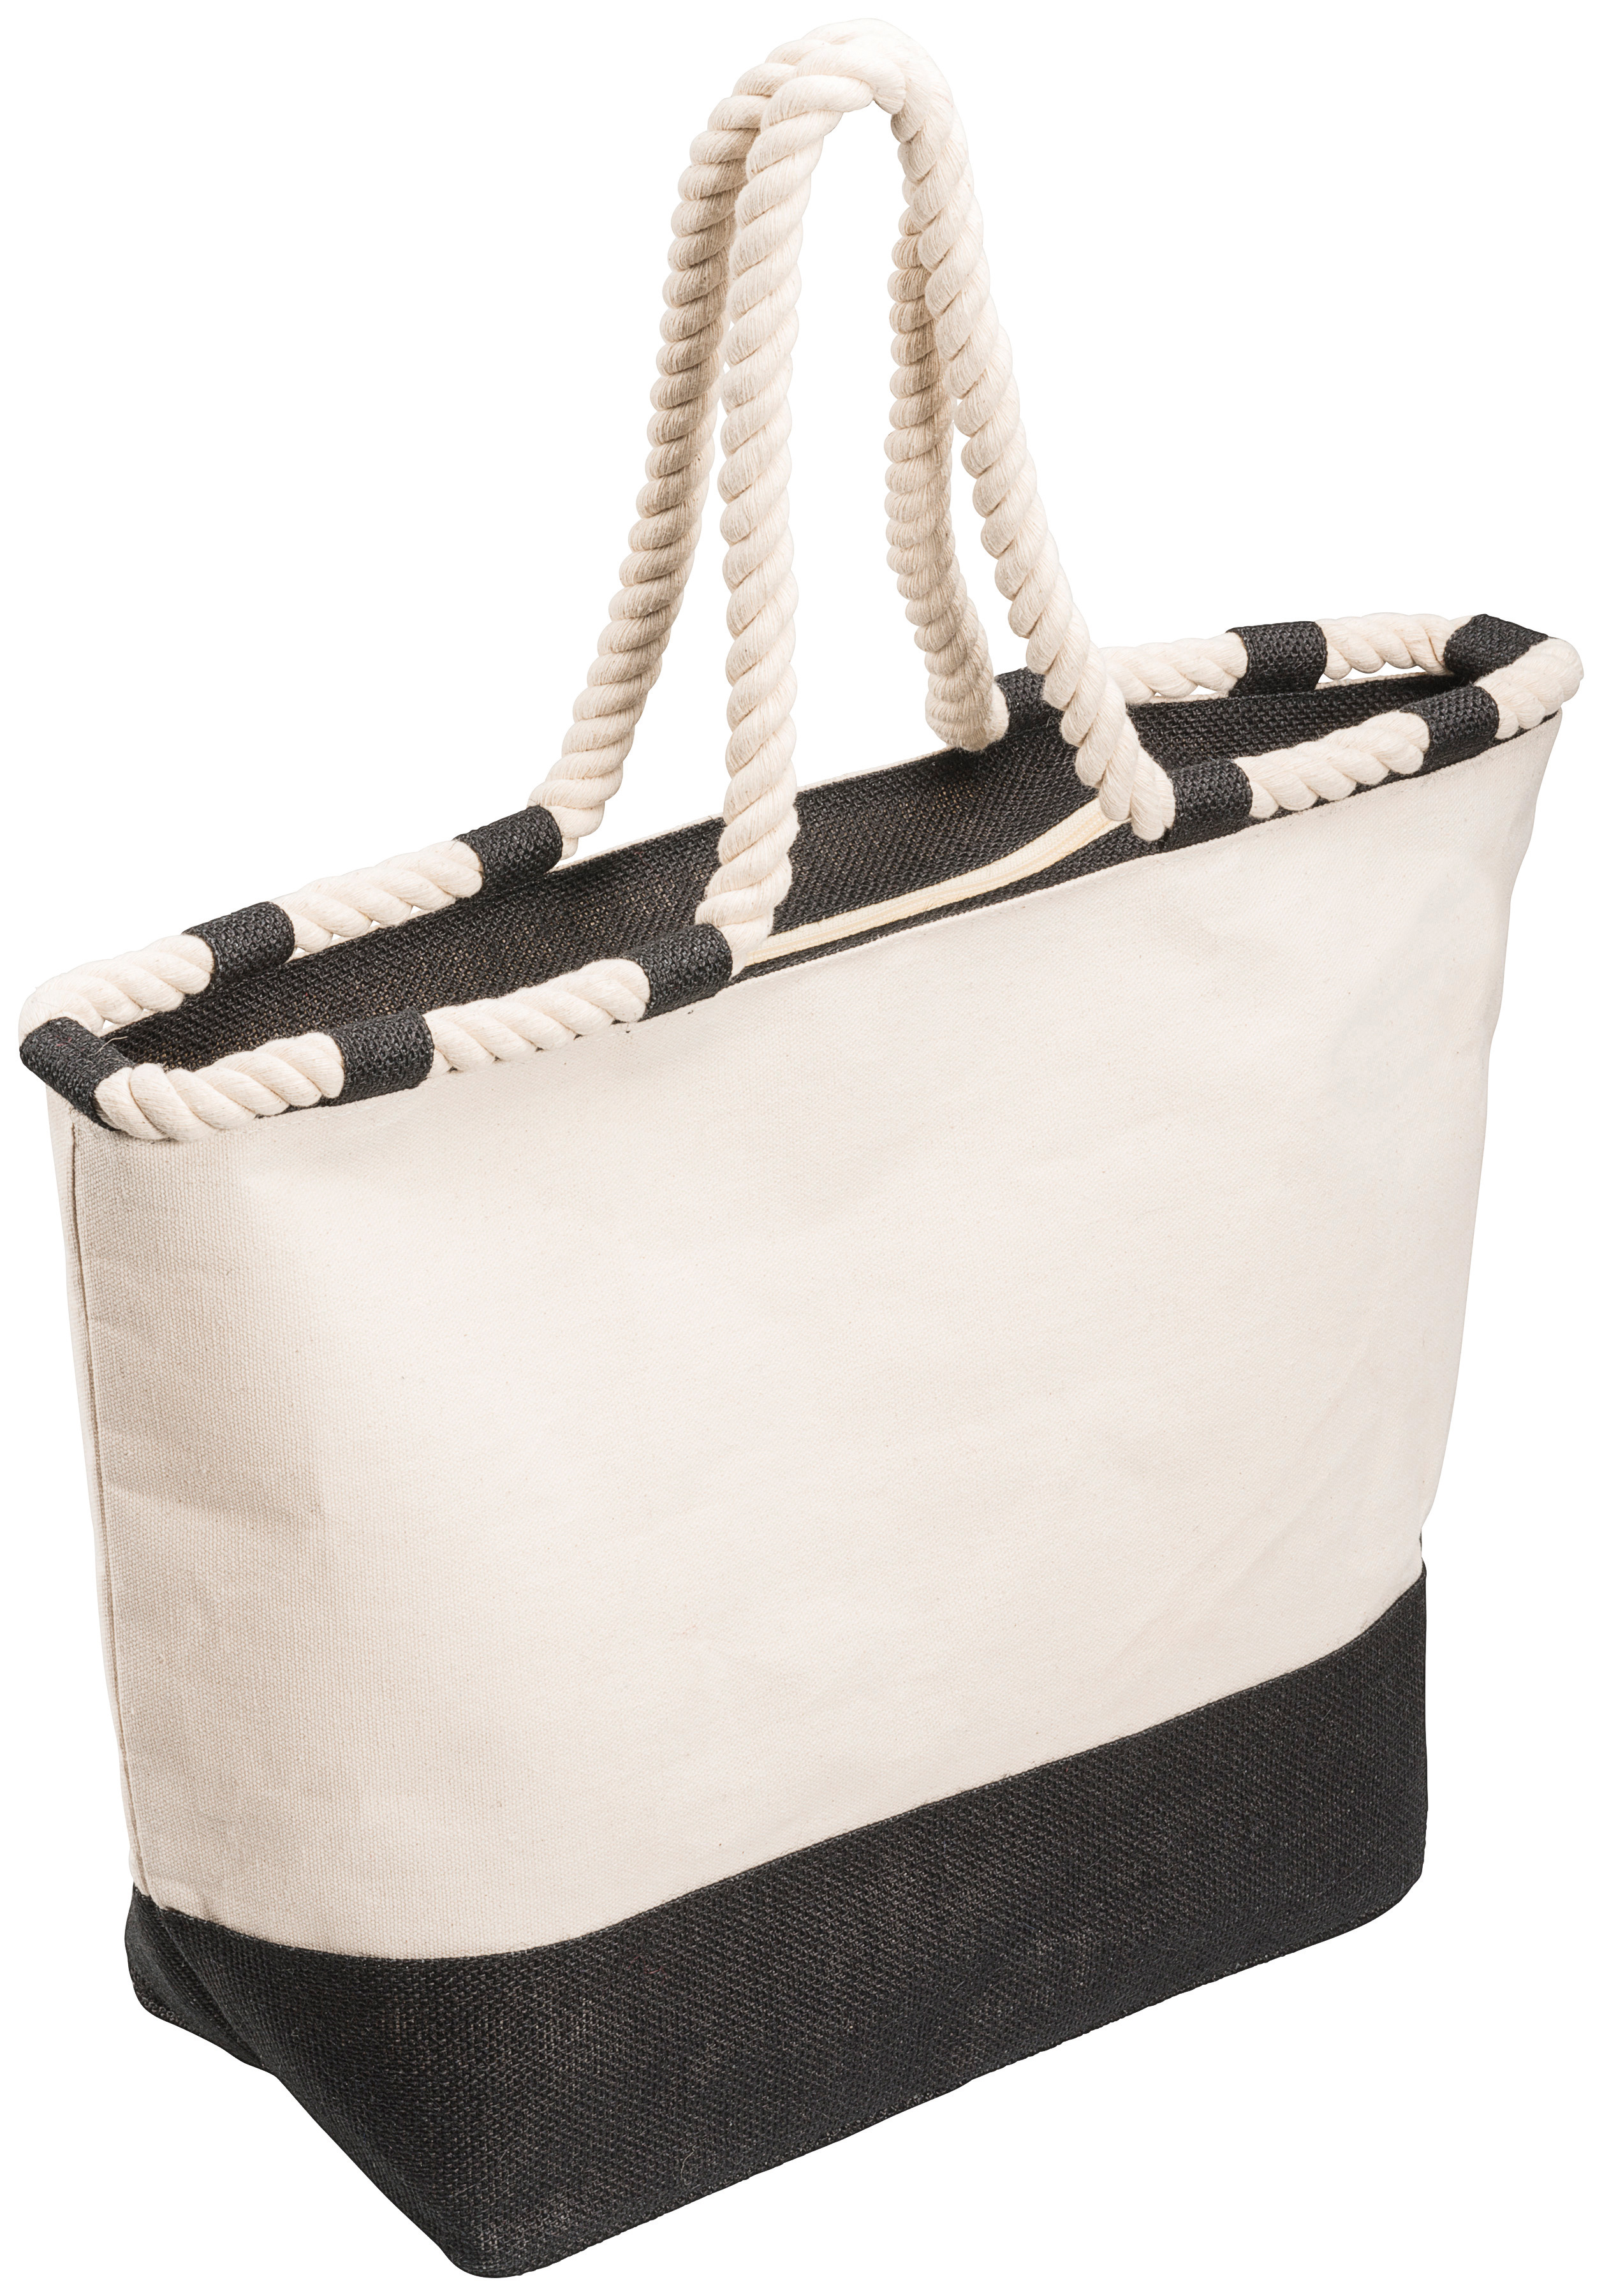 Zippered Tote Bag Canvas | IUCN Water